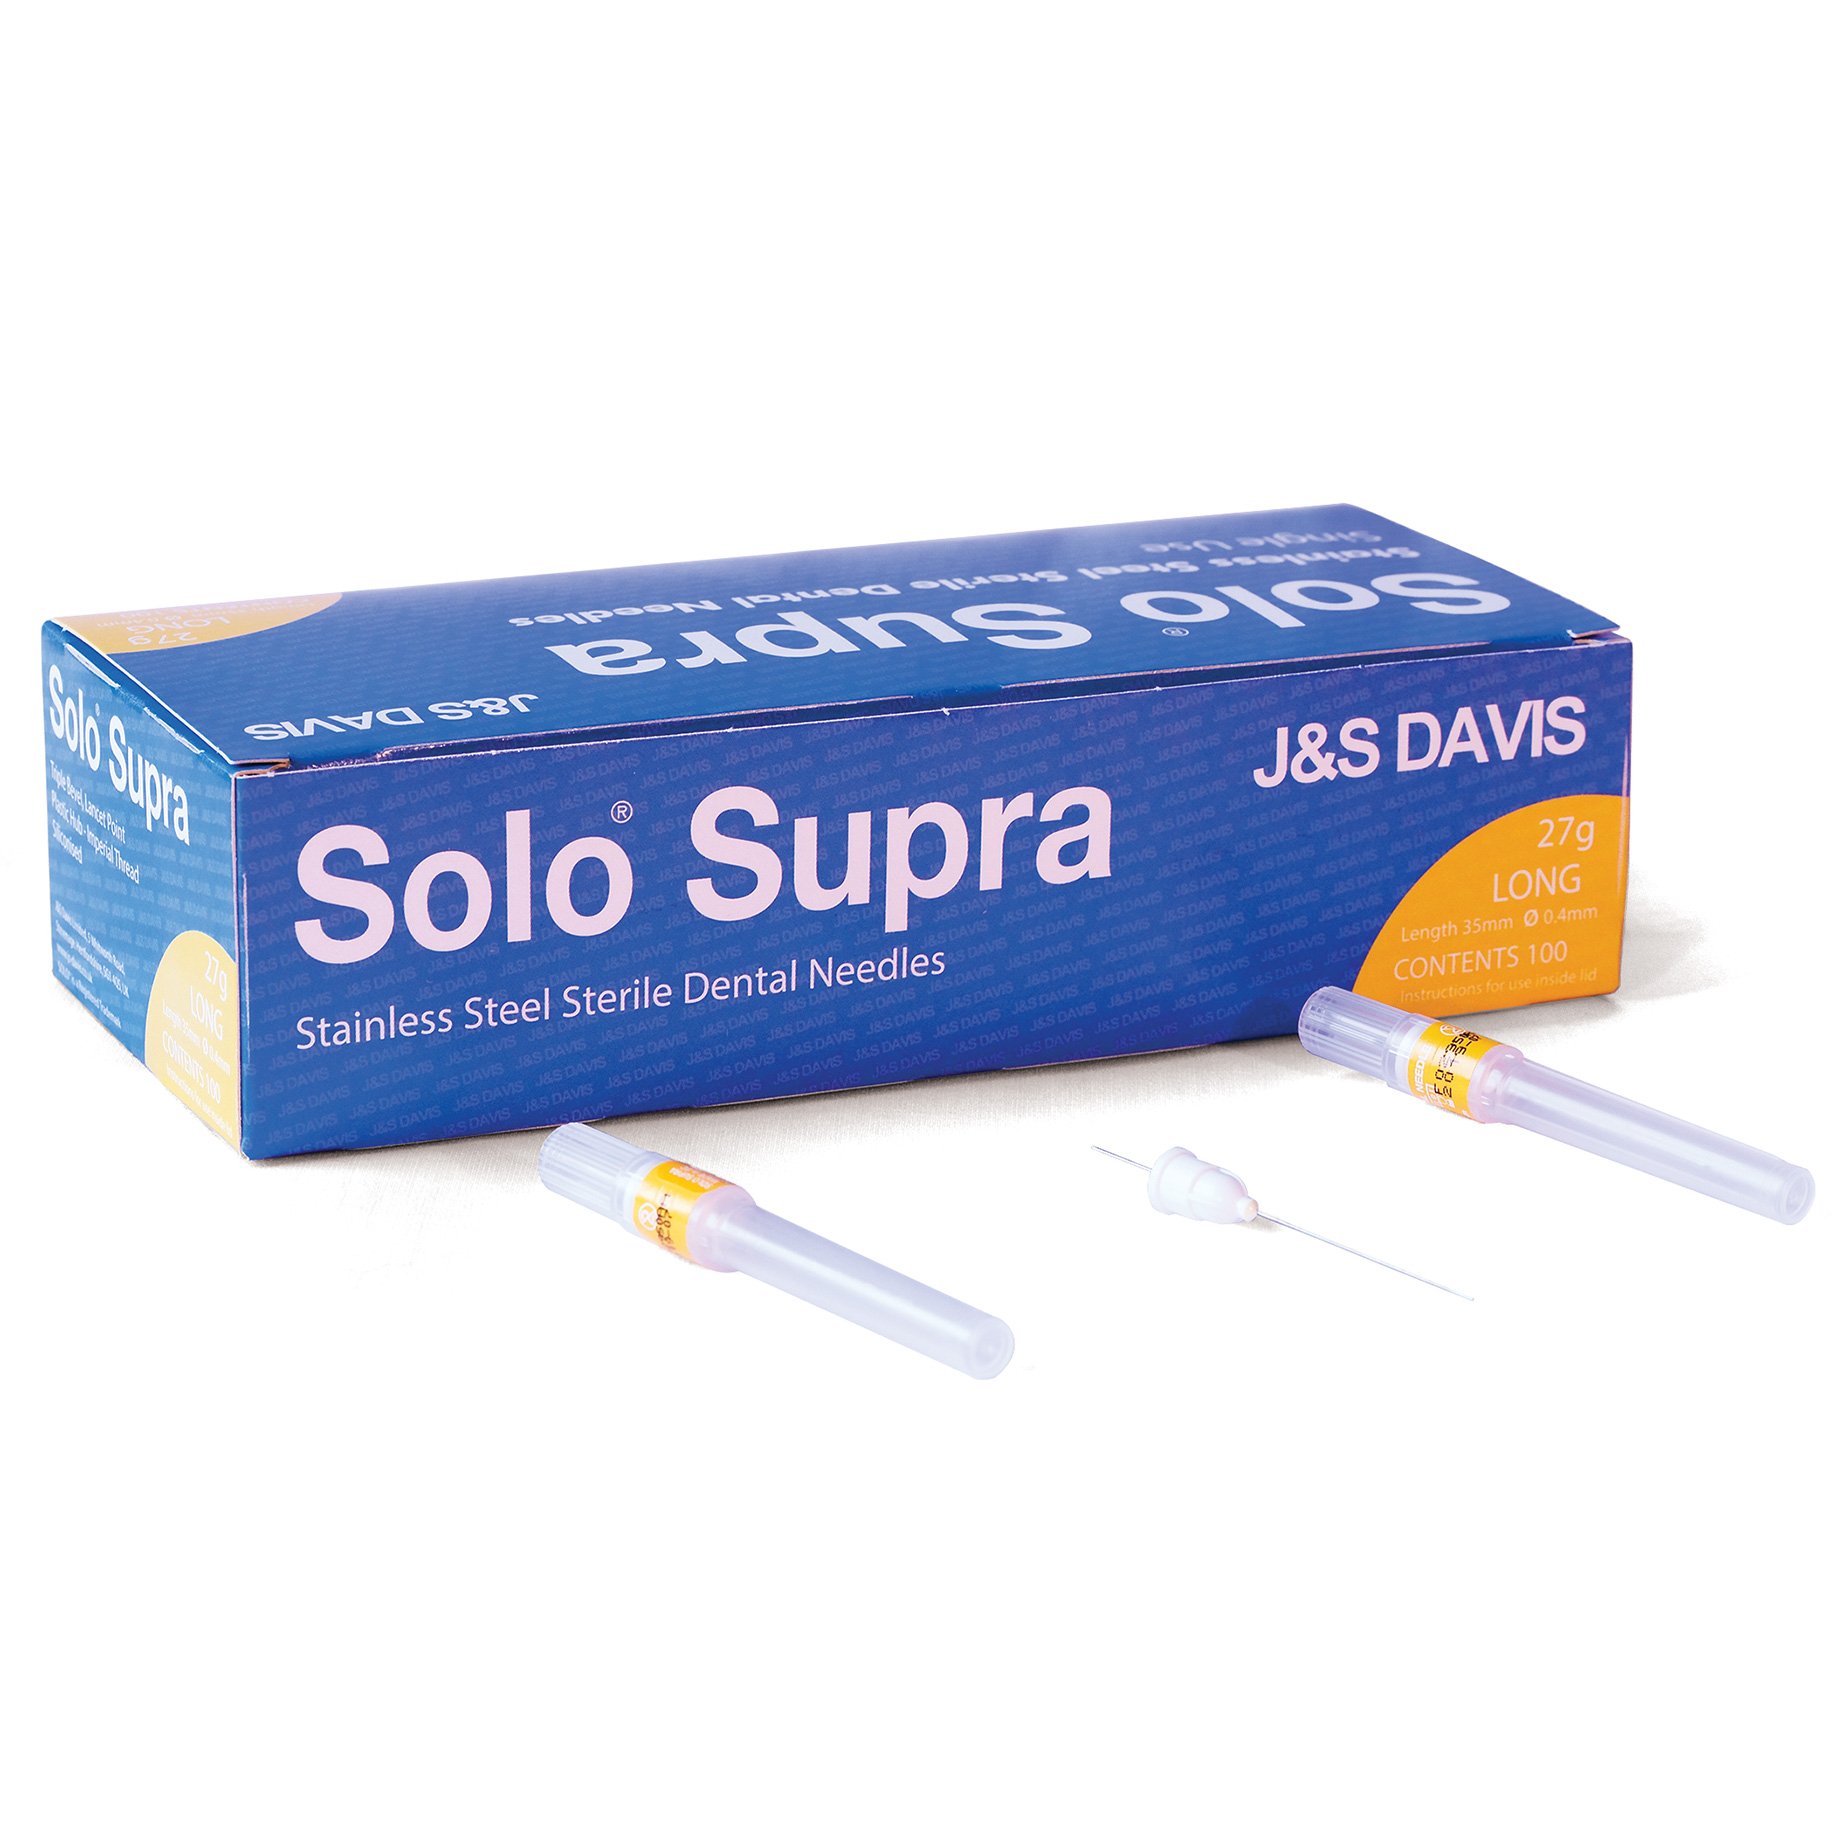 Solo Supra Needles 30G - Short - Red ( 0.30 x 23mm) 